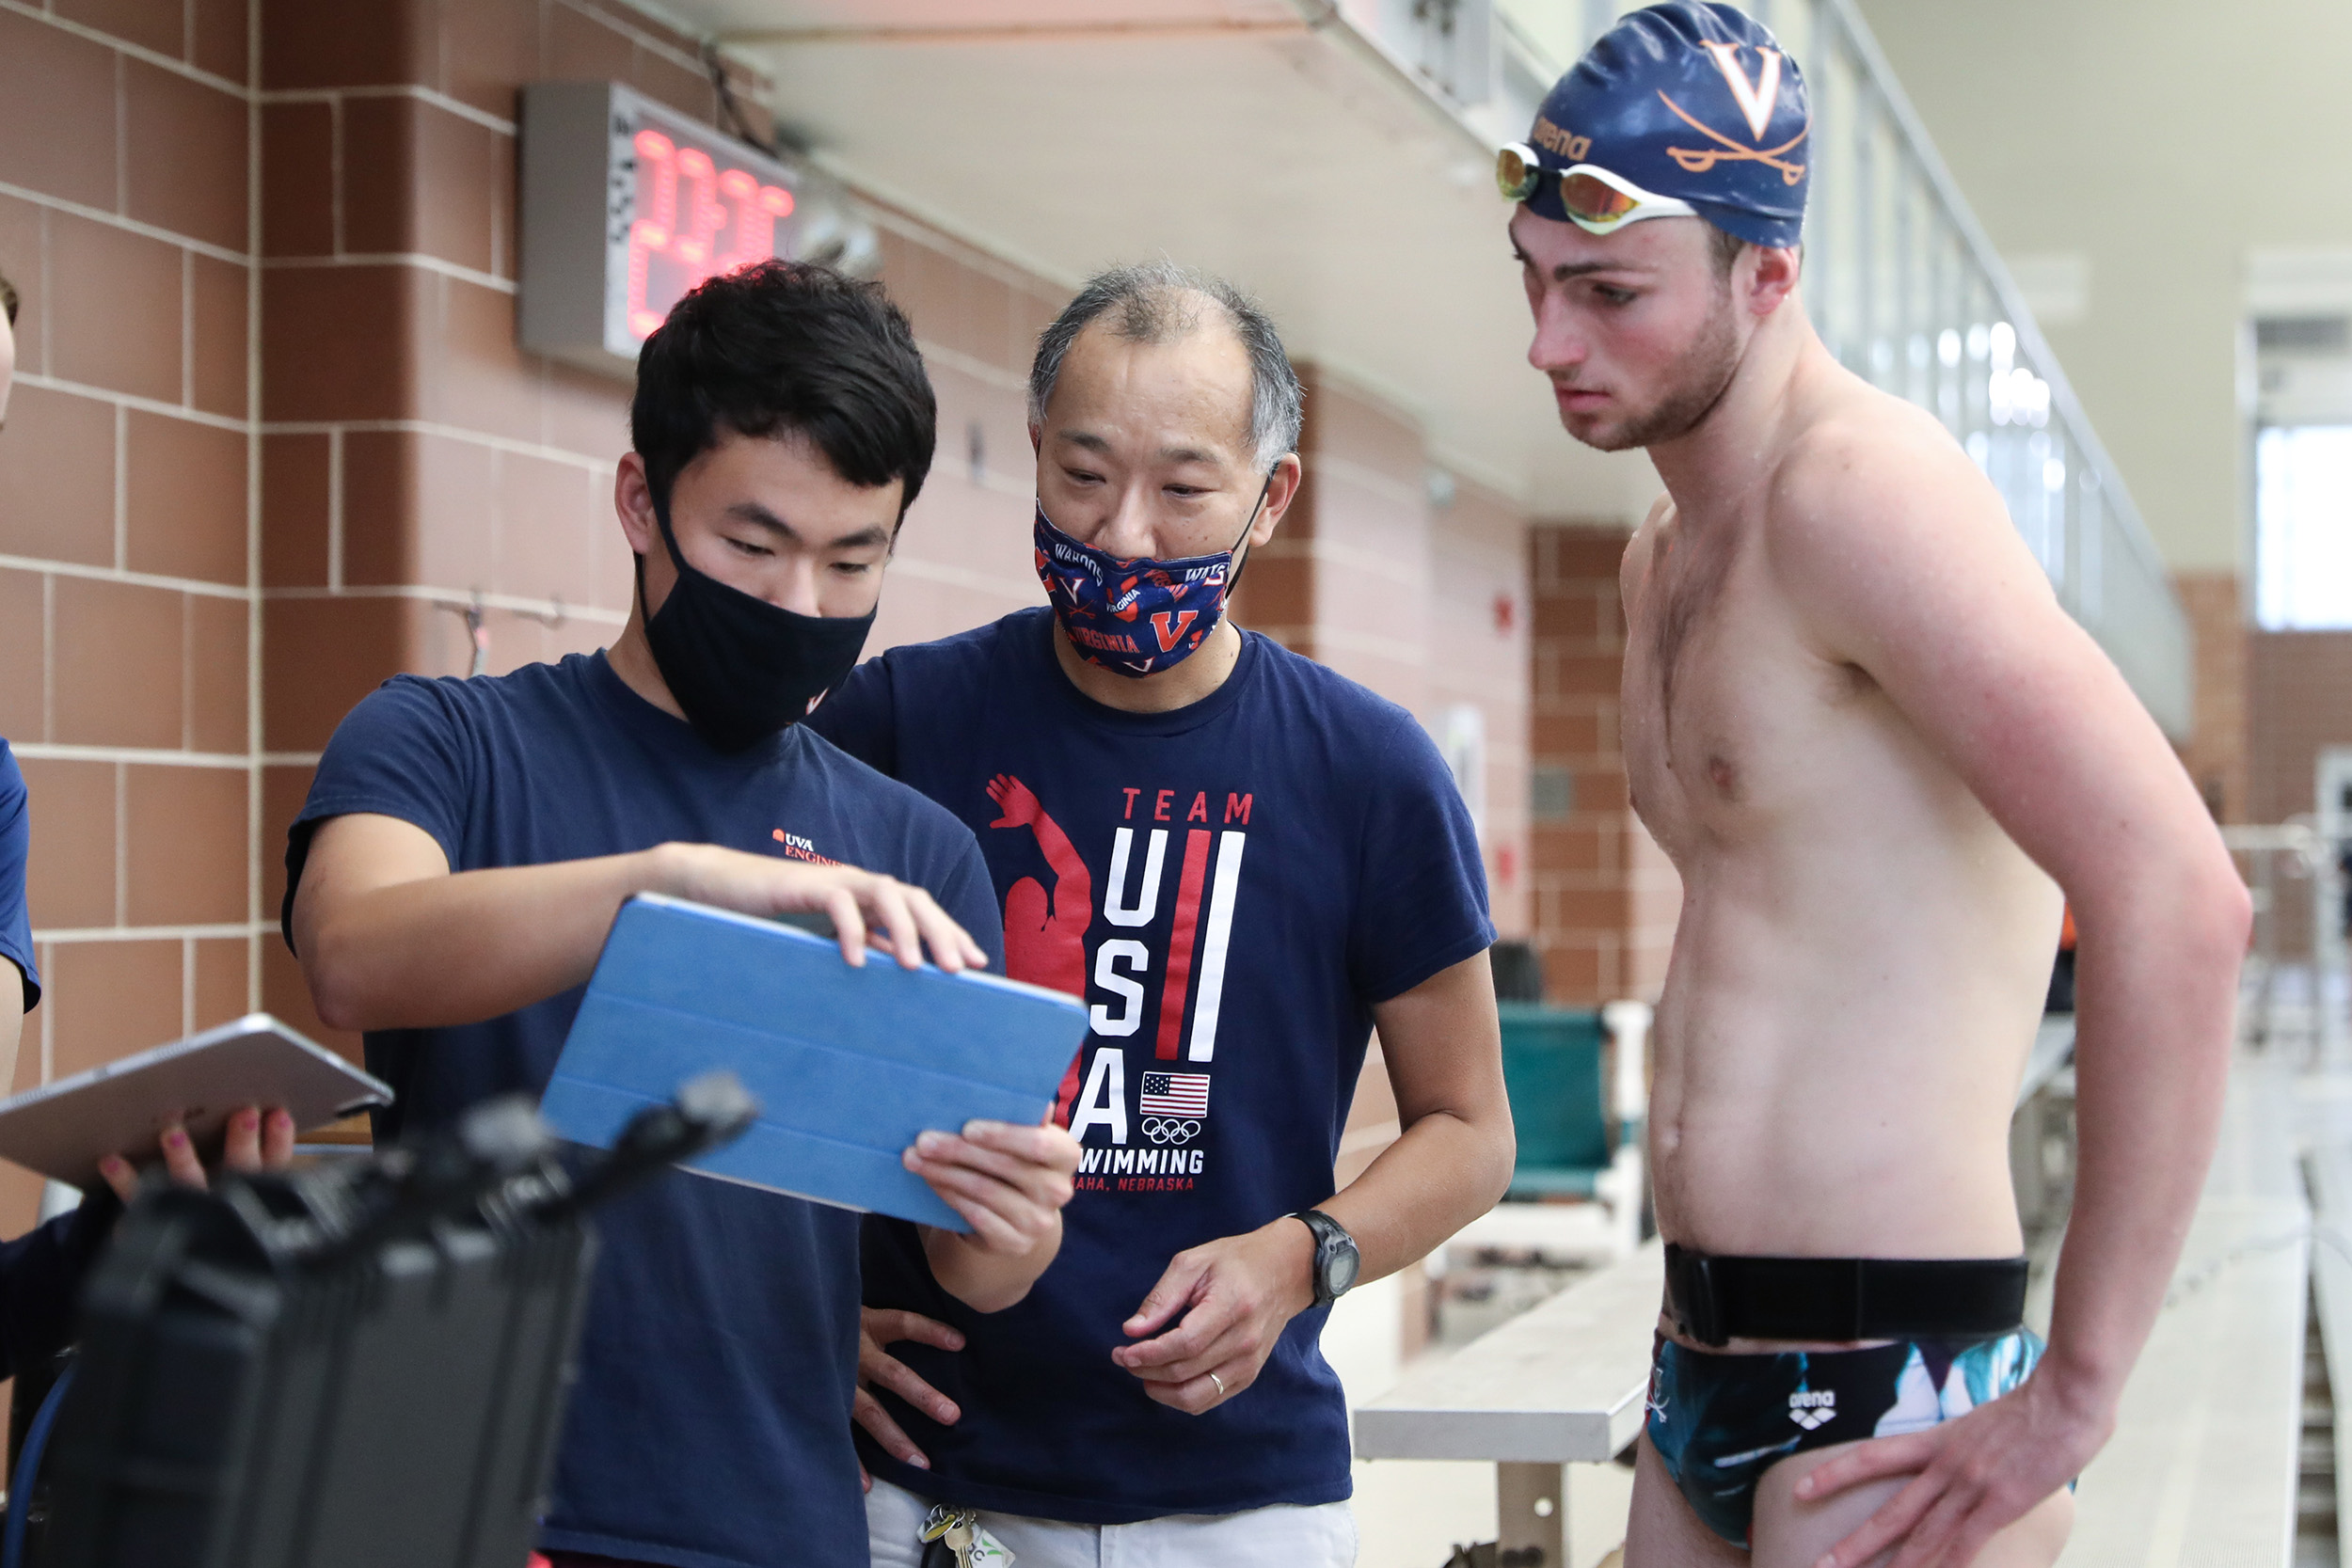 Coaches and swimmer looking on tablet at information